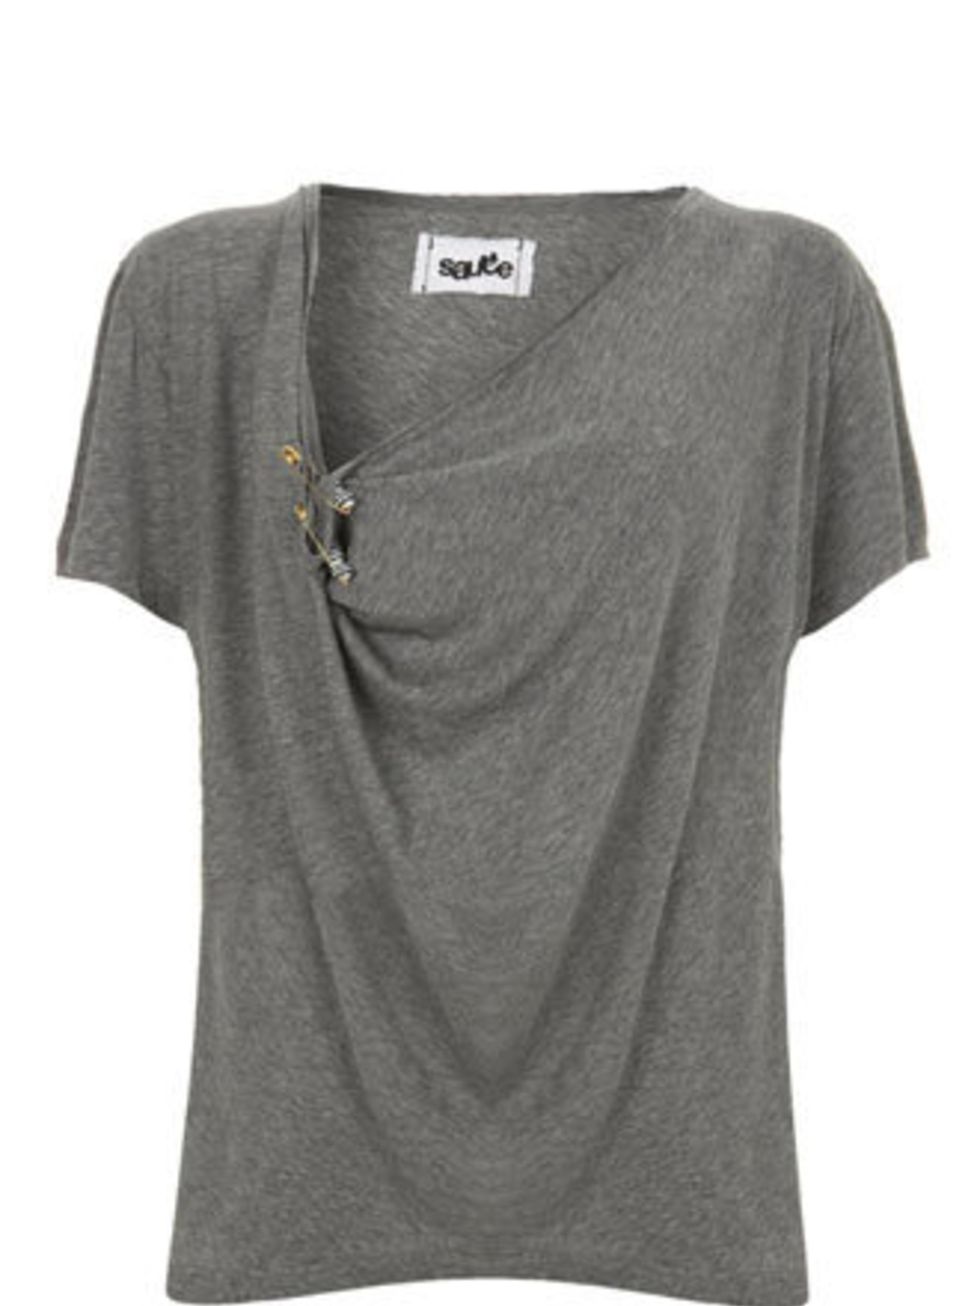 <p>A fine tee is a must-have wardrobe staple. Pair with smart trousers, blazer and heels for the office. For the weekend, this will add a cool vibe to jeans.</p><p>T-Shirt, £48 by Sauce at <a href="http://www.bunnyhug.co.uk/fashionshop/gbu0-prodshow/Sauce